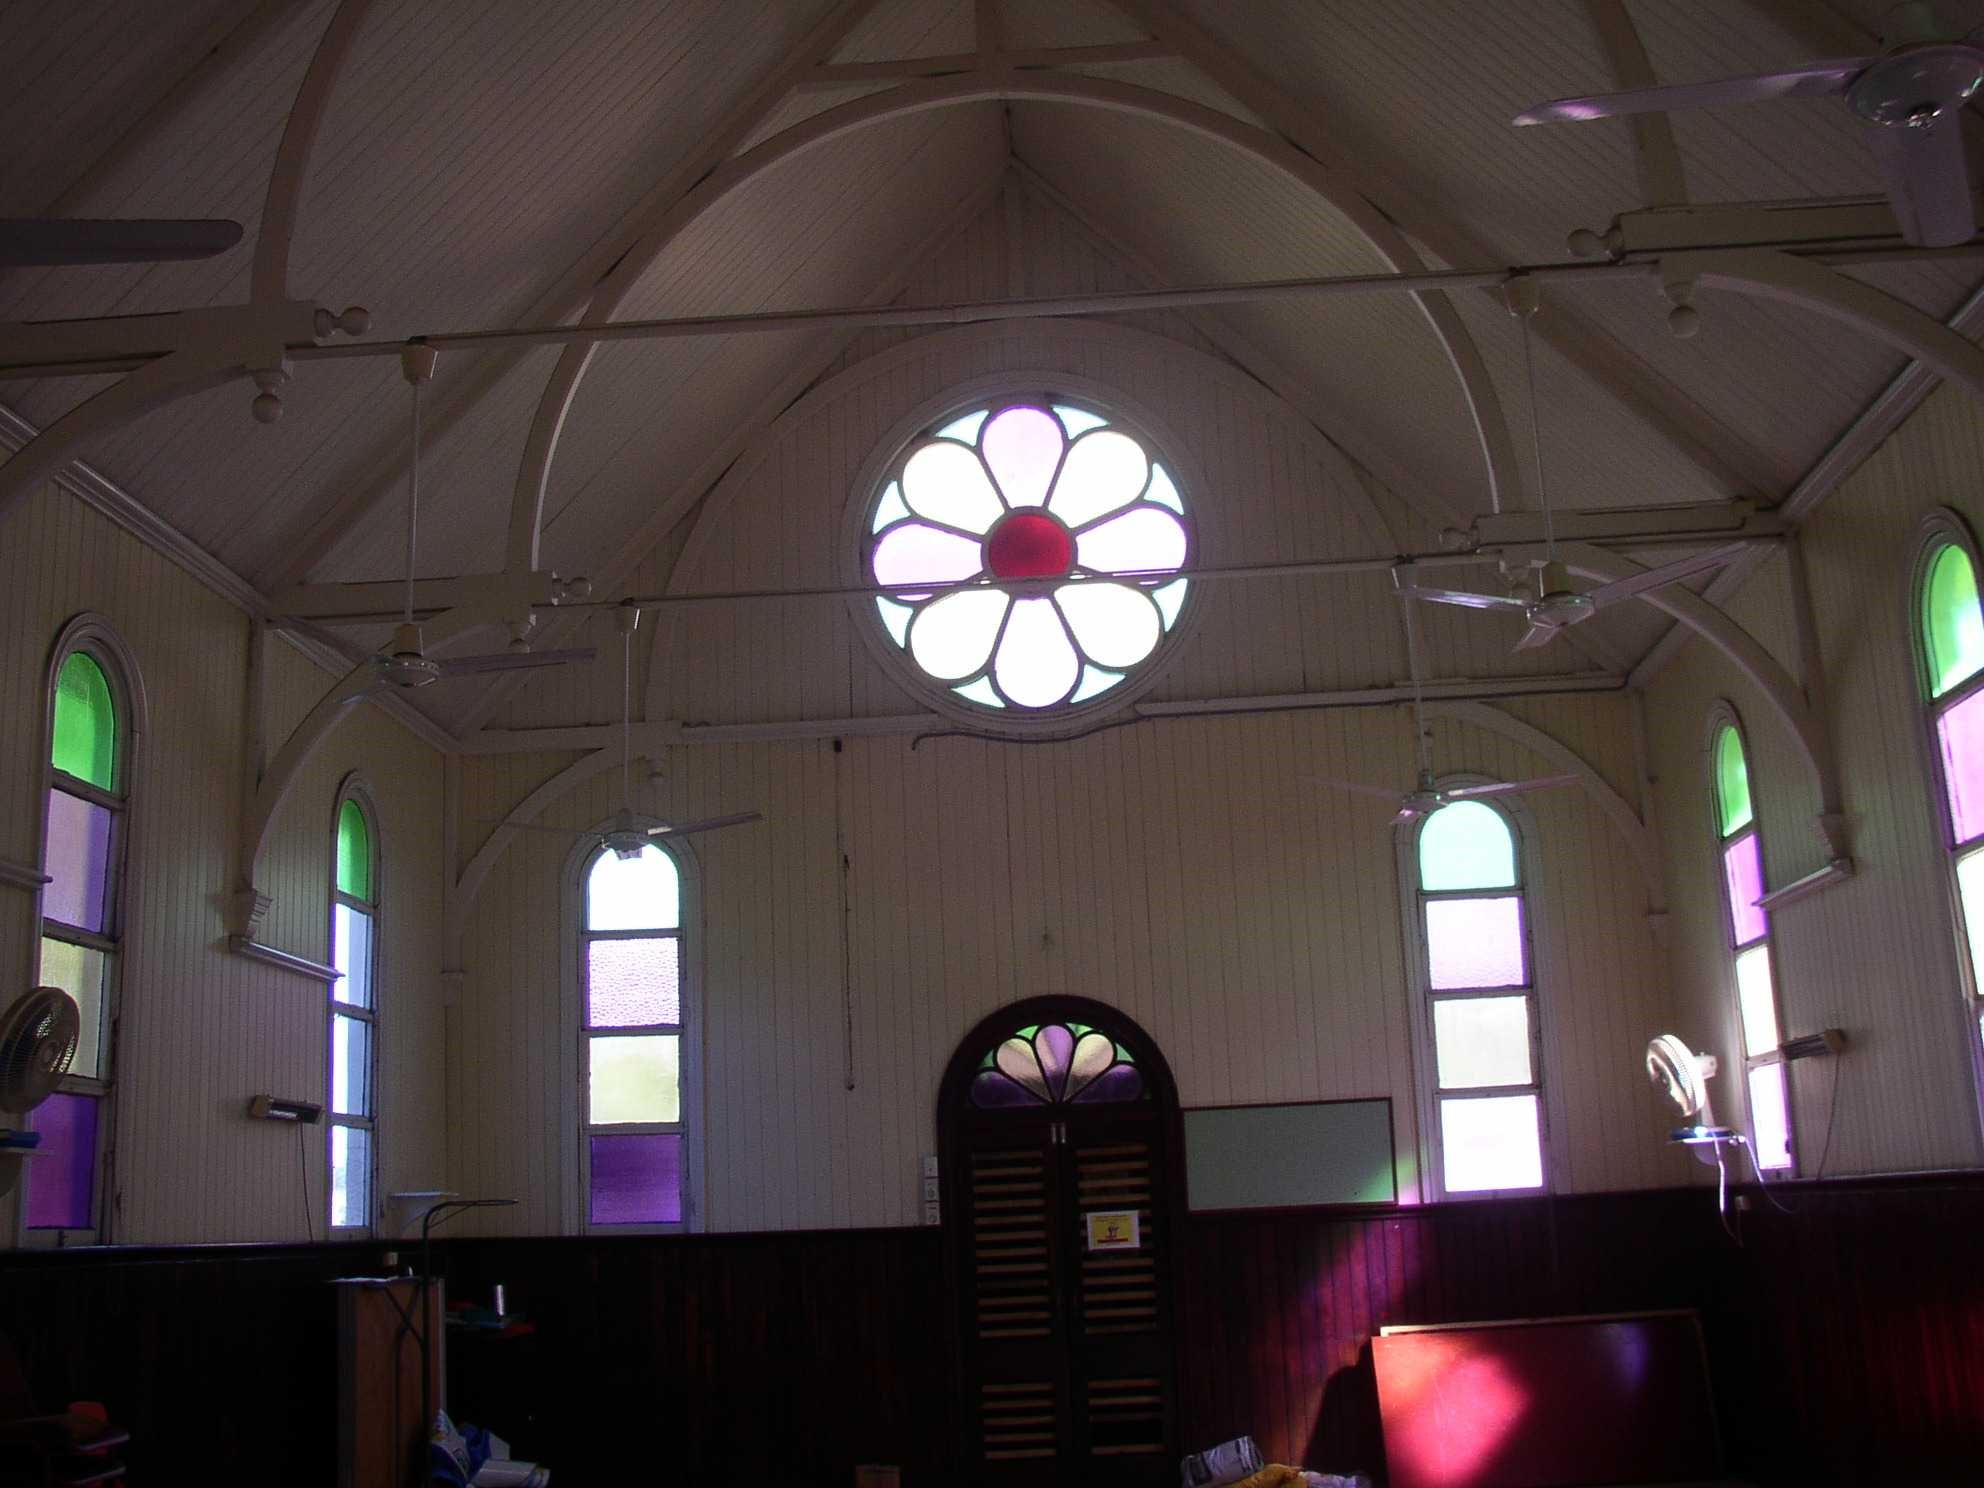 This is an image of the local heritage place known as Bald Hills Presbyterian Church Interior, showing rose window at the front of the church and cedar panelling